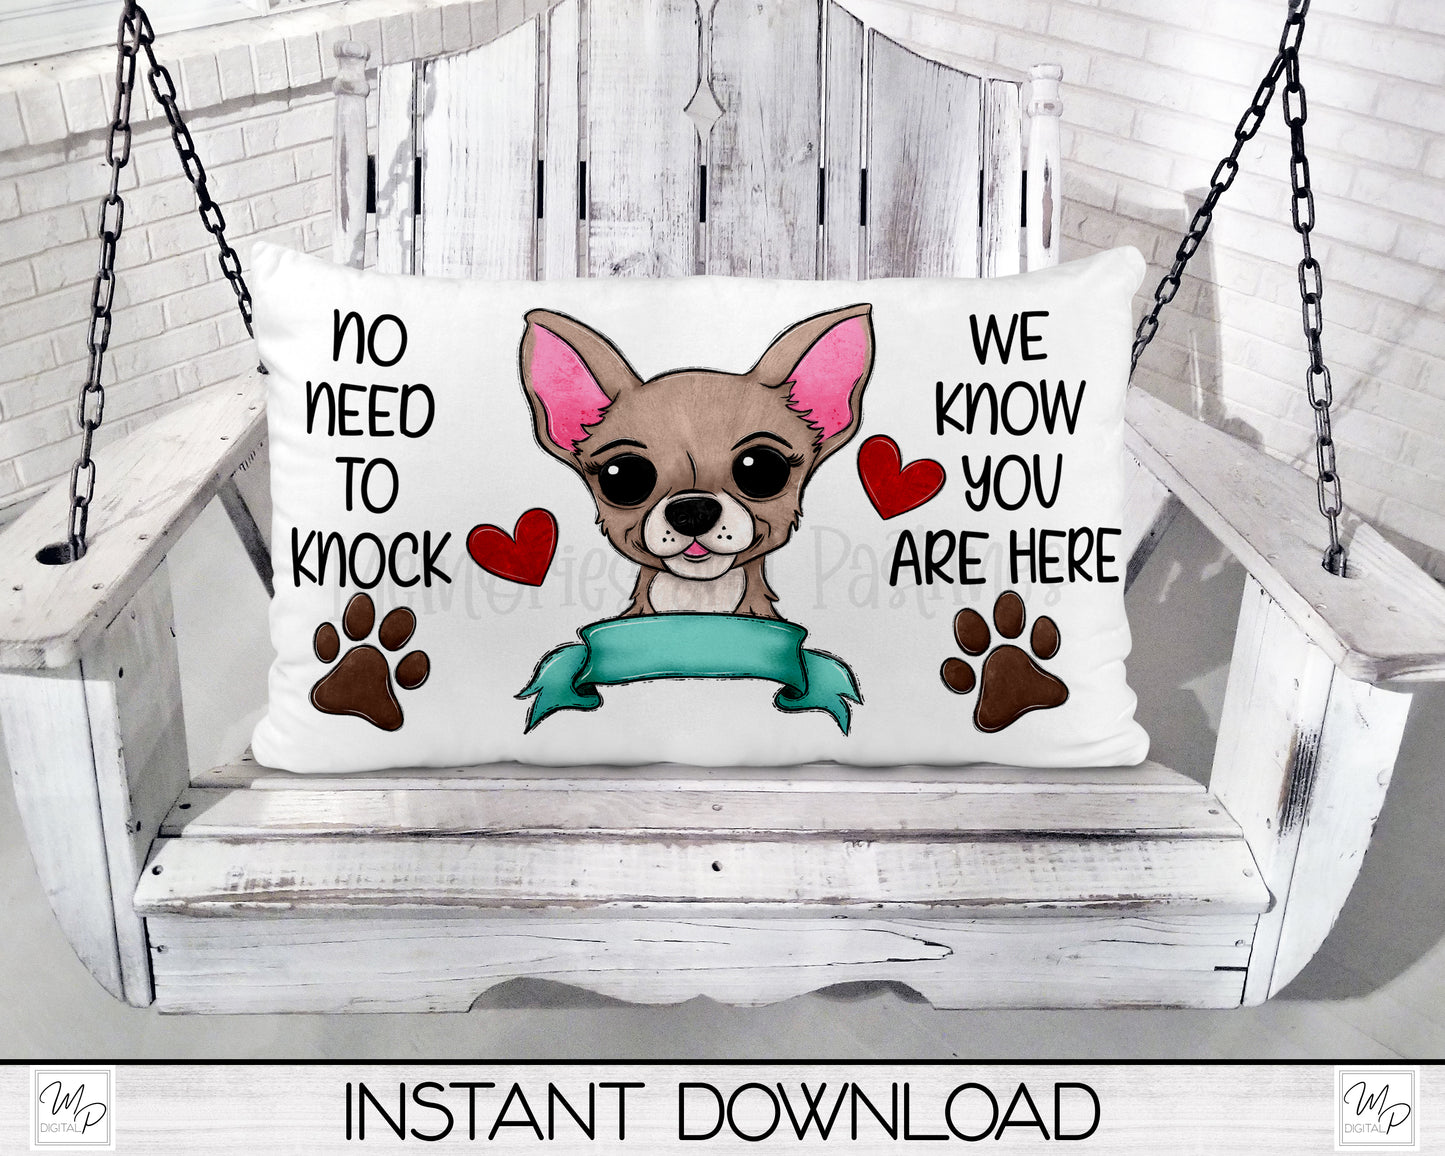 Chihuahua Door Mat Design for Sublimation, No Need To Knock, Digital Download